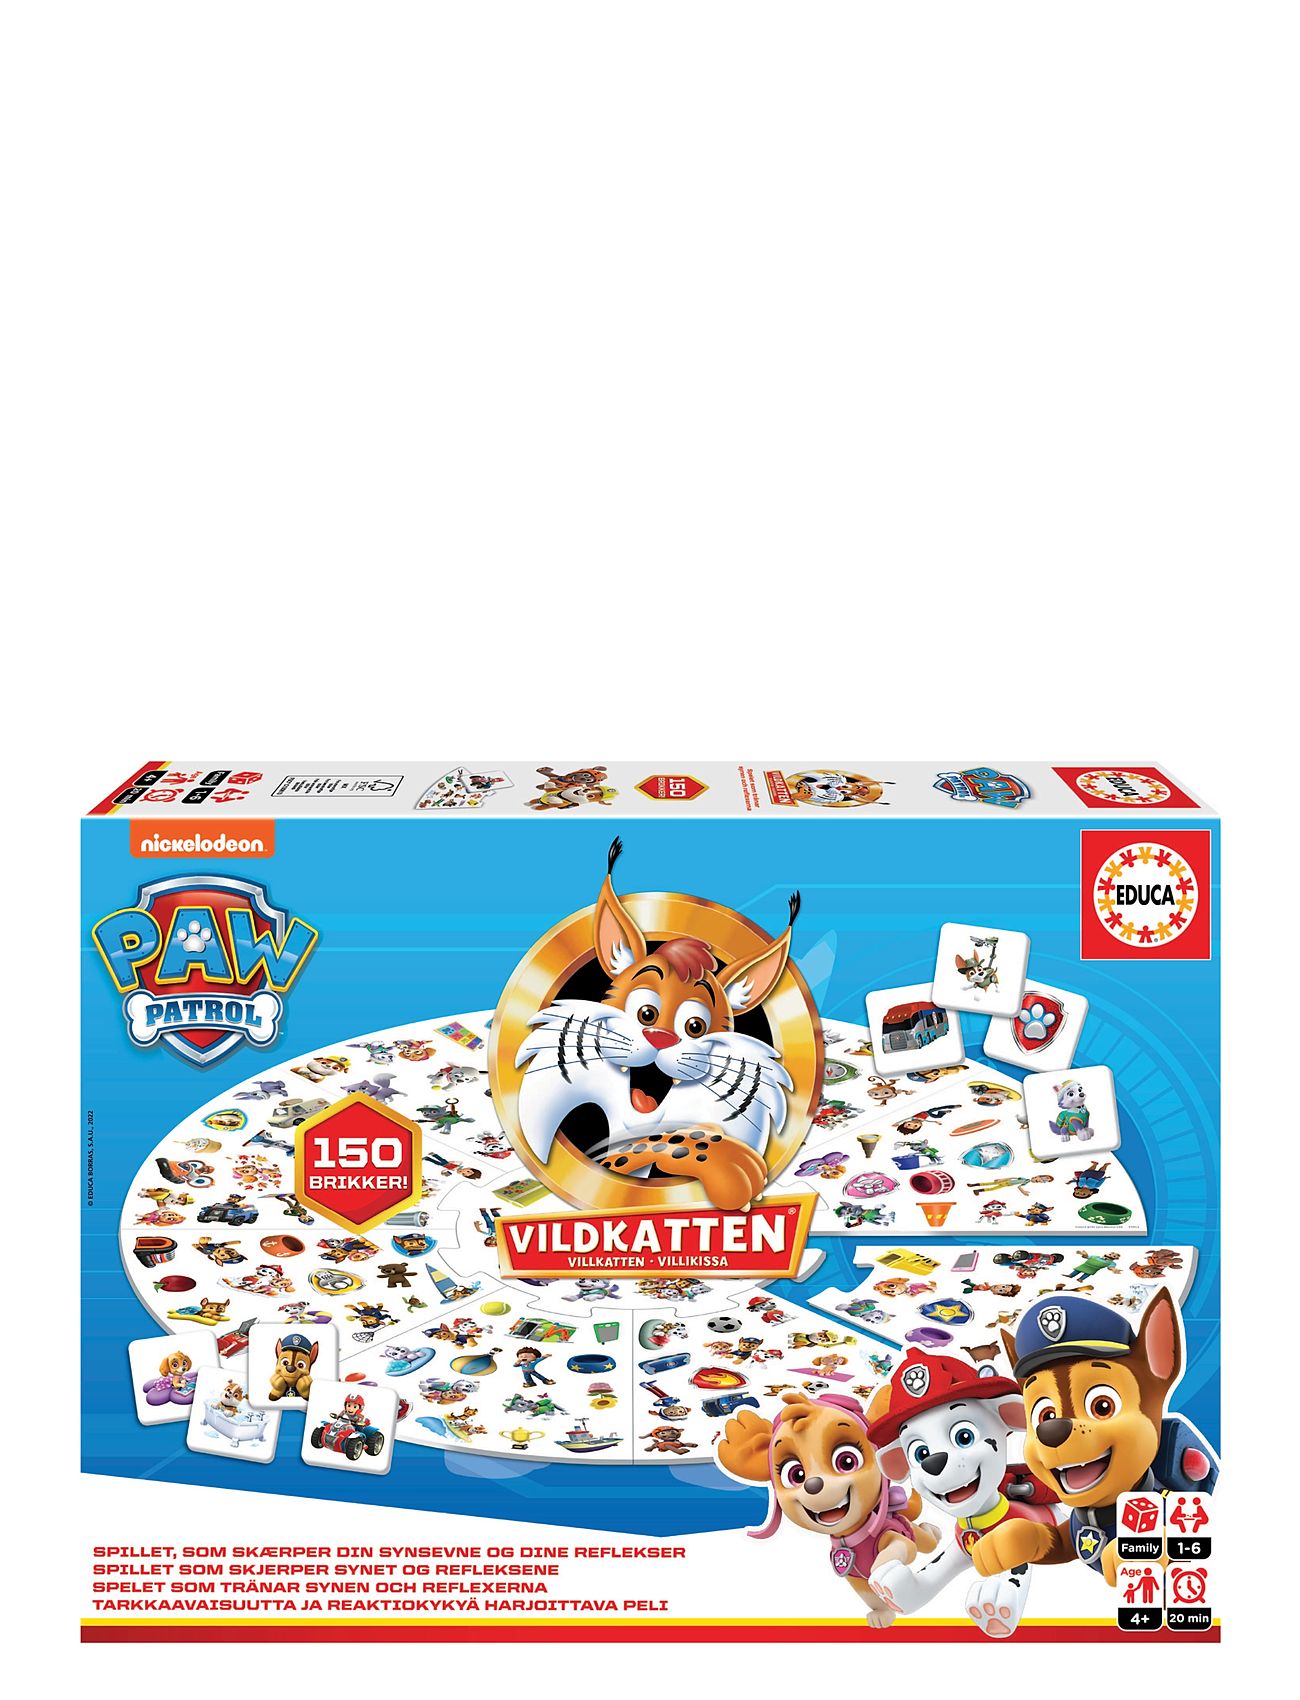 Vildkatten Paw Patrol Toys Puzzles And Games Games Card Games Multi/patterned Vildkatten